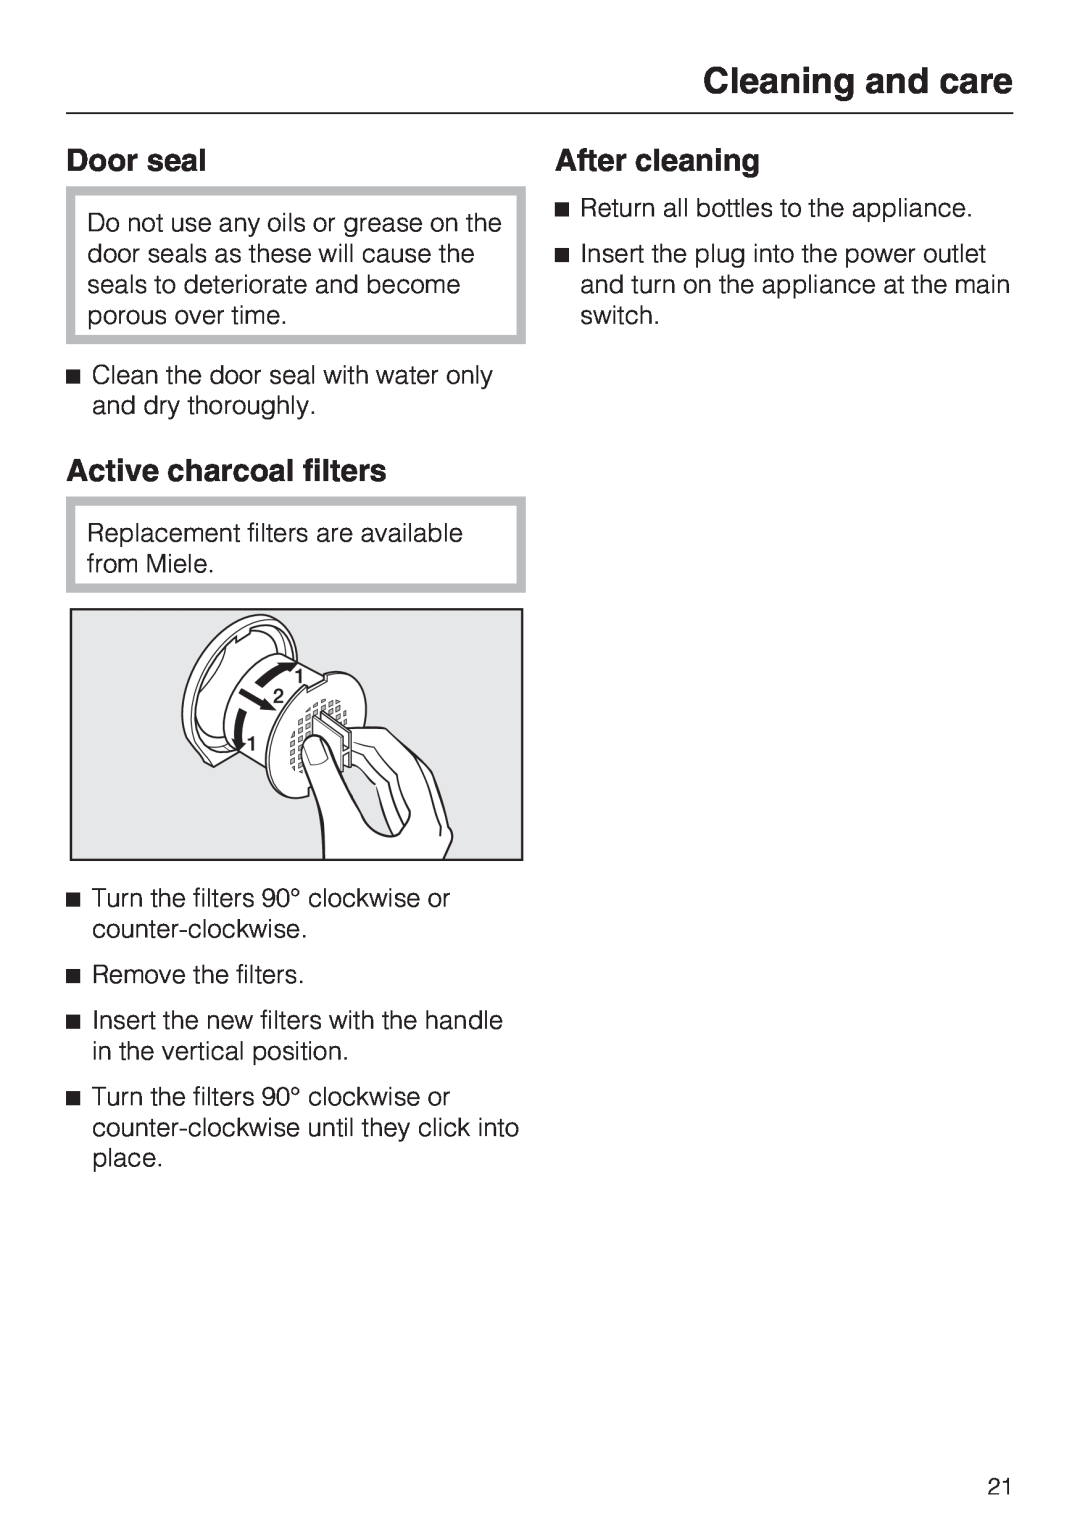 Miele KWT 4154 UG-1 installation instructions Door seal, Active charcoal filters, After cleaning, Cleaning and care 